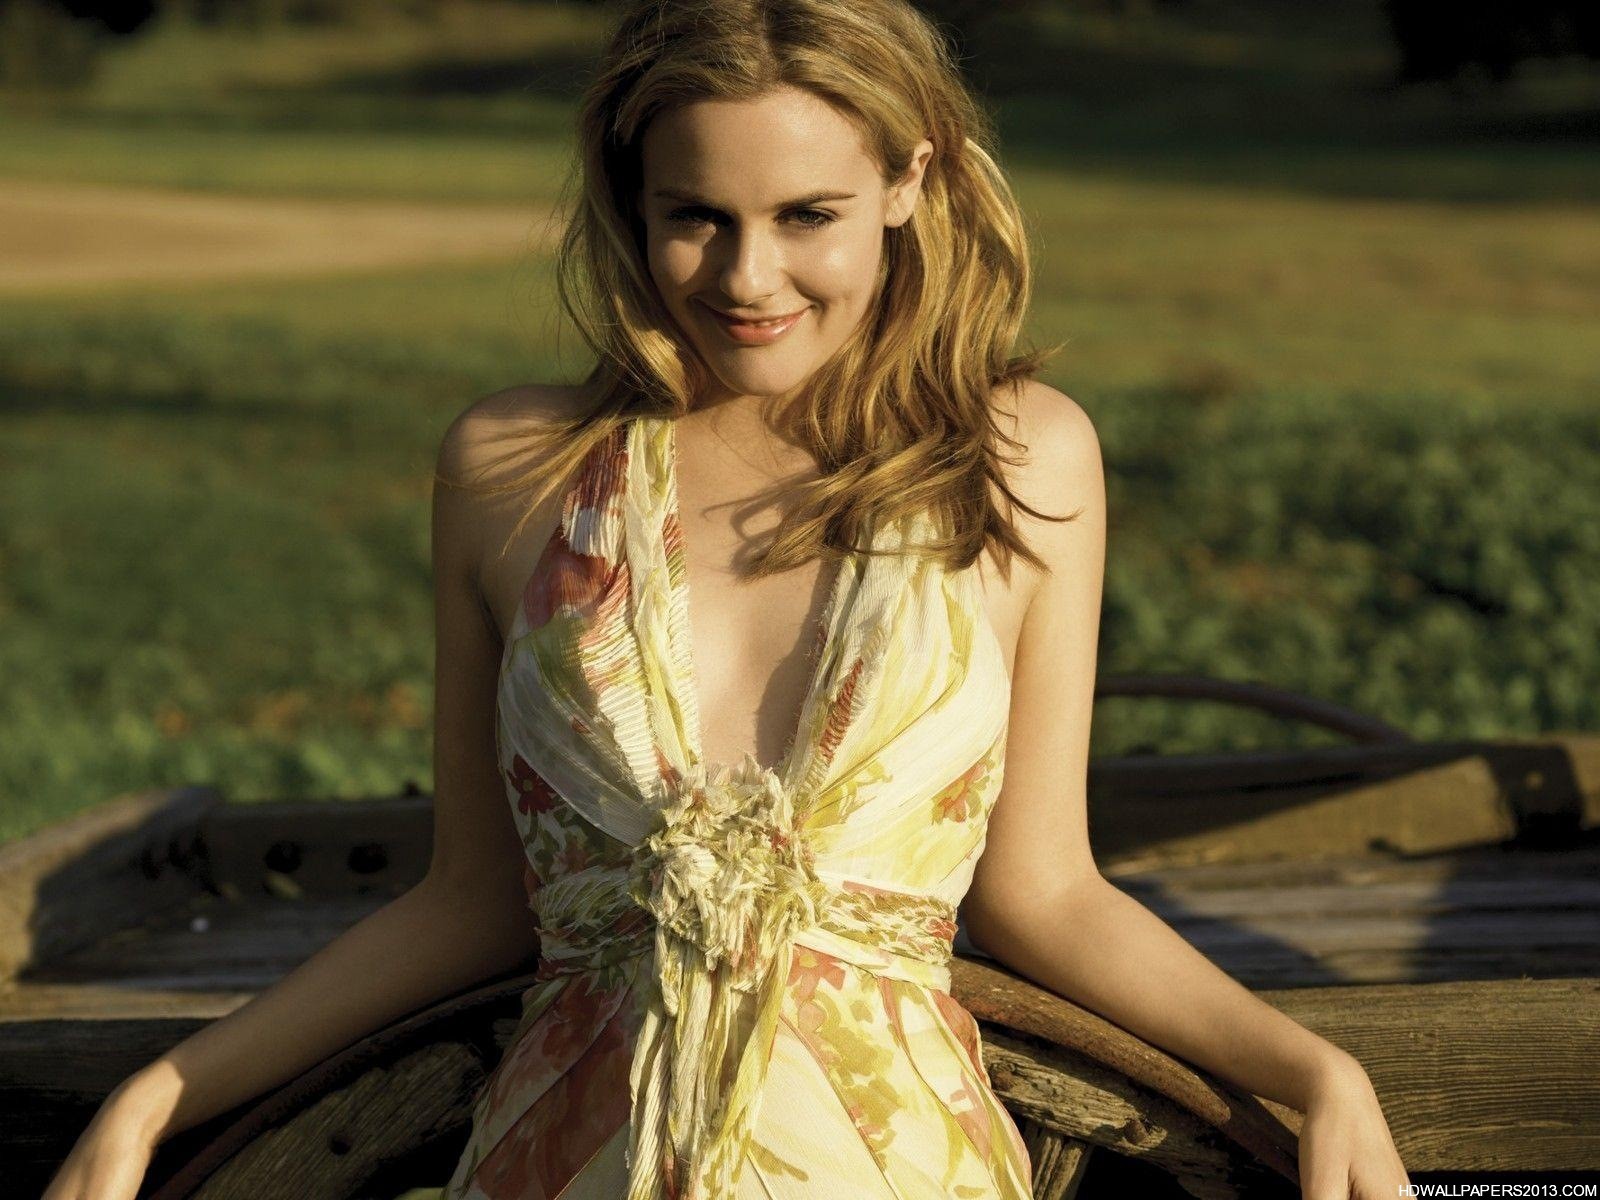 Alicia Silverstone High Definition Wallpapers High Definition